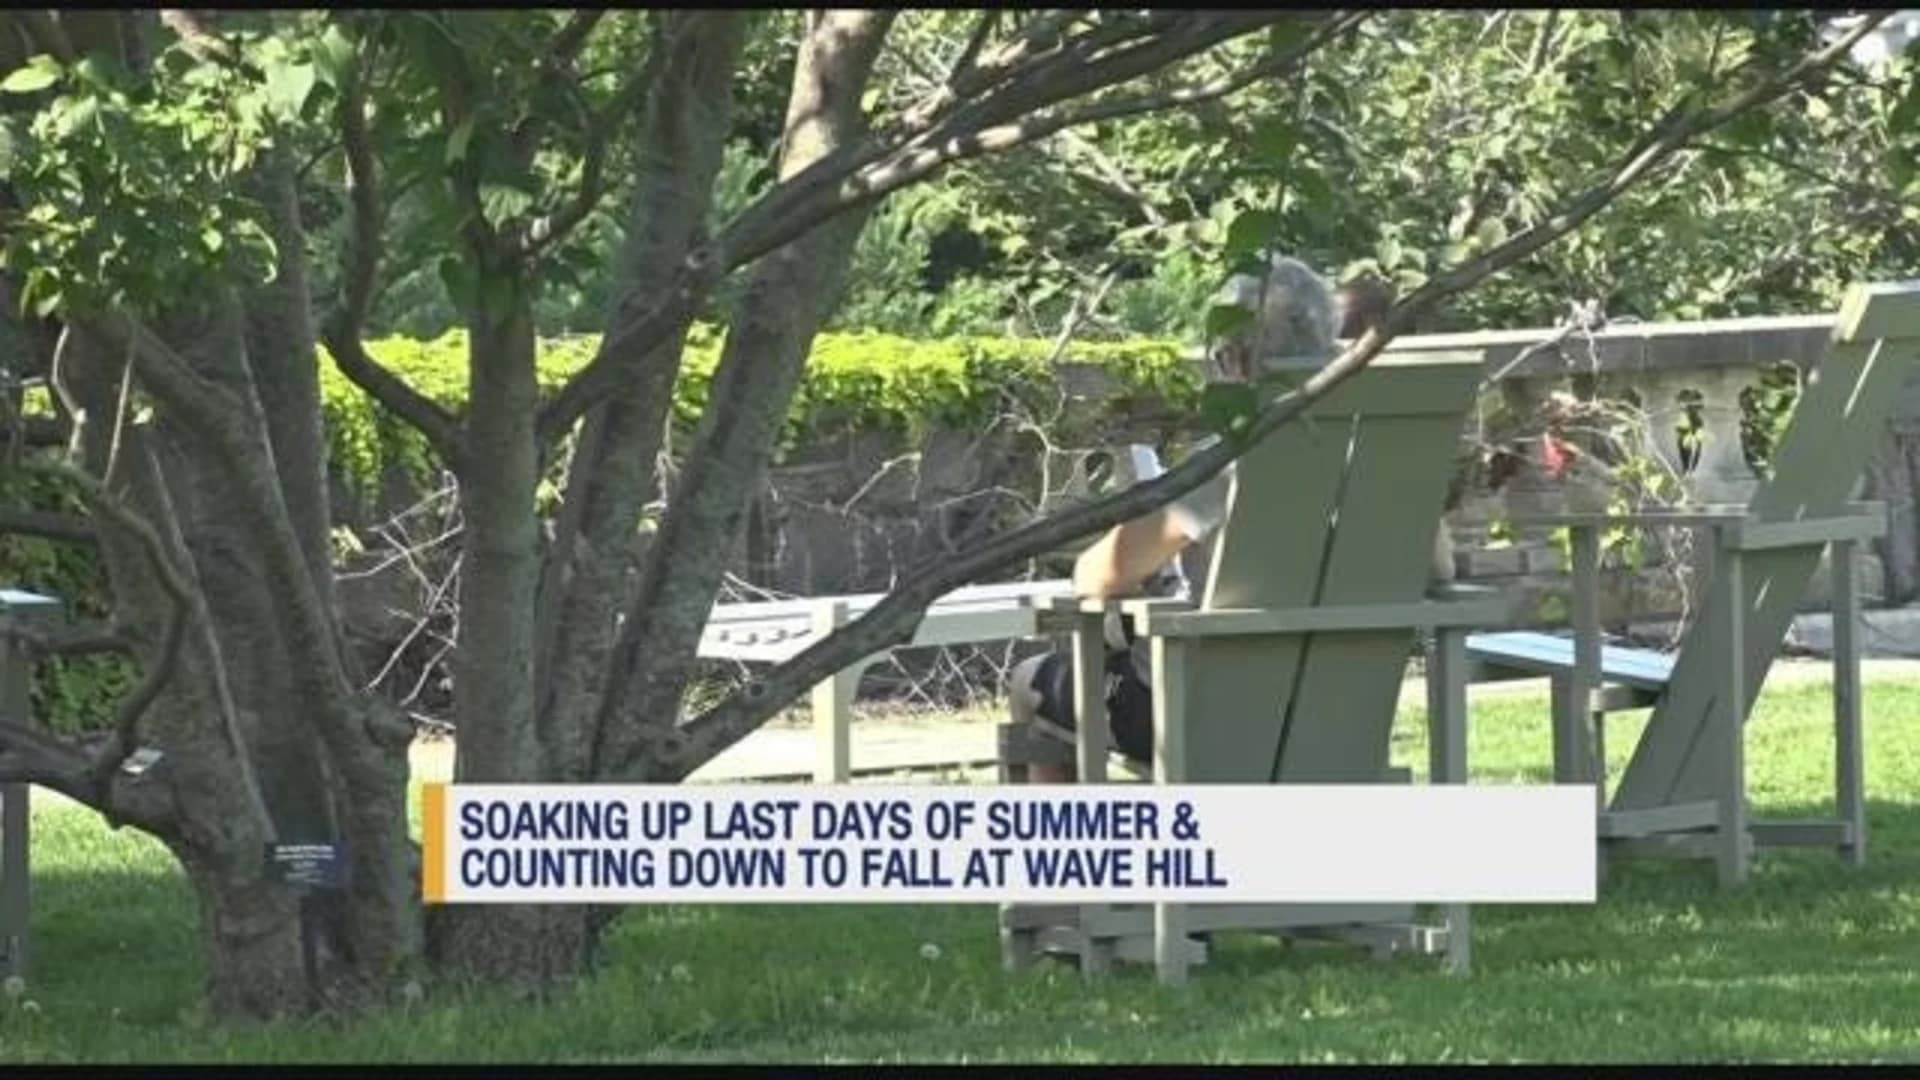 Residents go outdoors for last days of summer